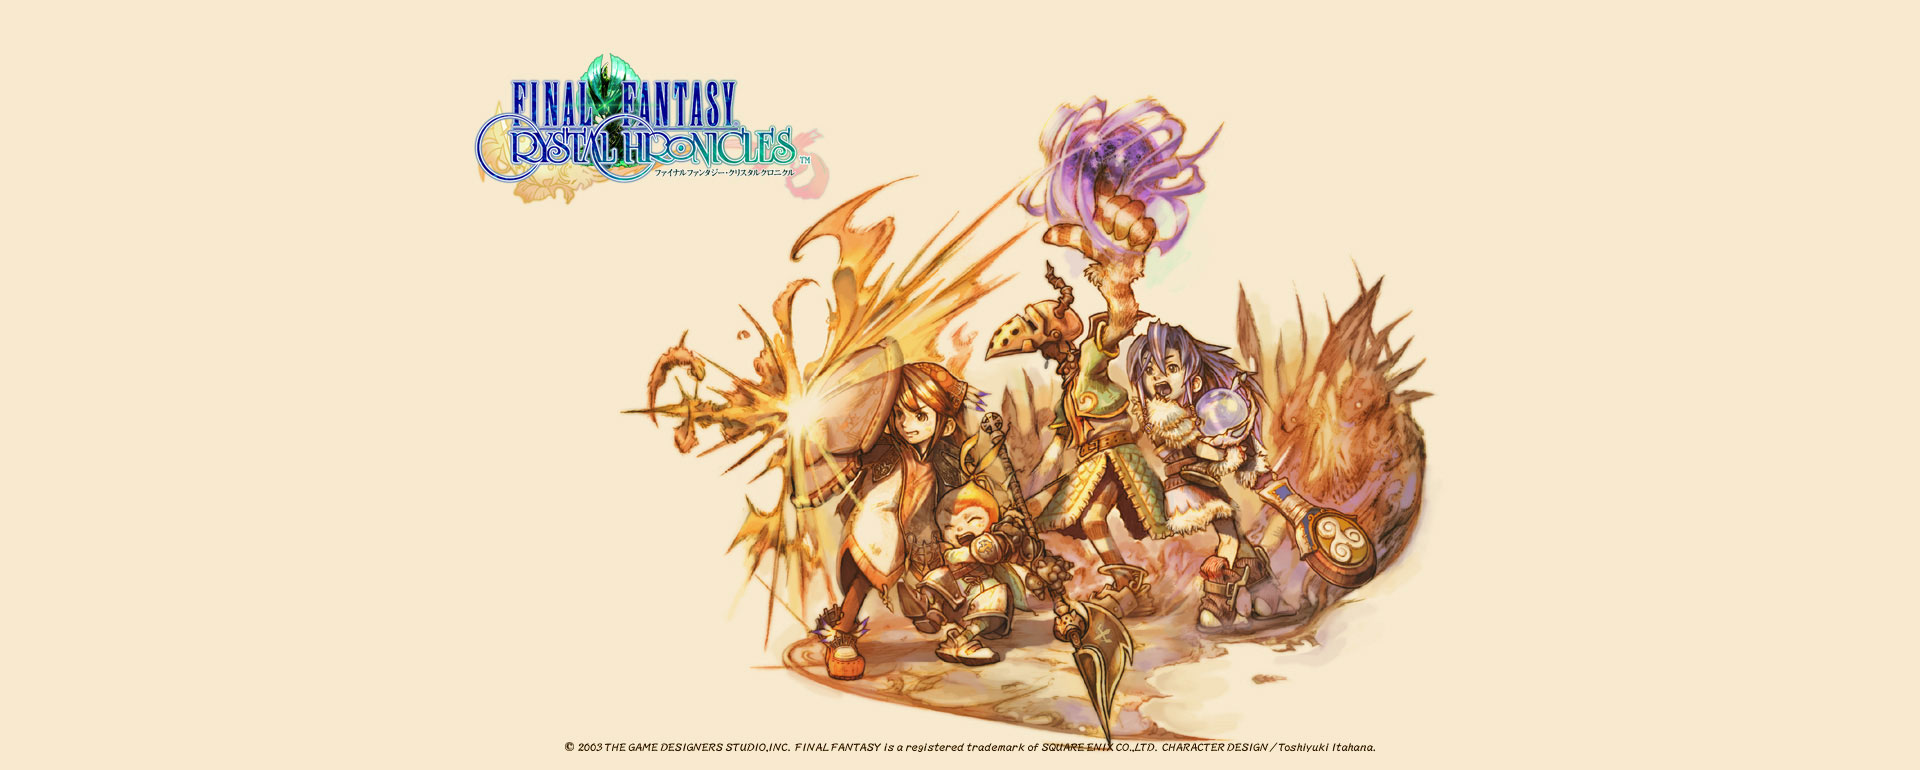 Final Fantasy Crystal Chronicles Remaster Edition